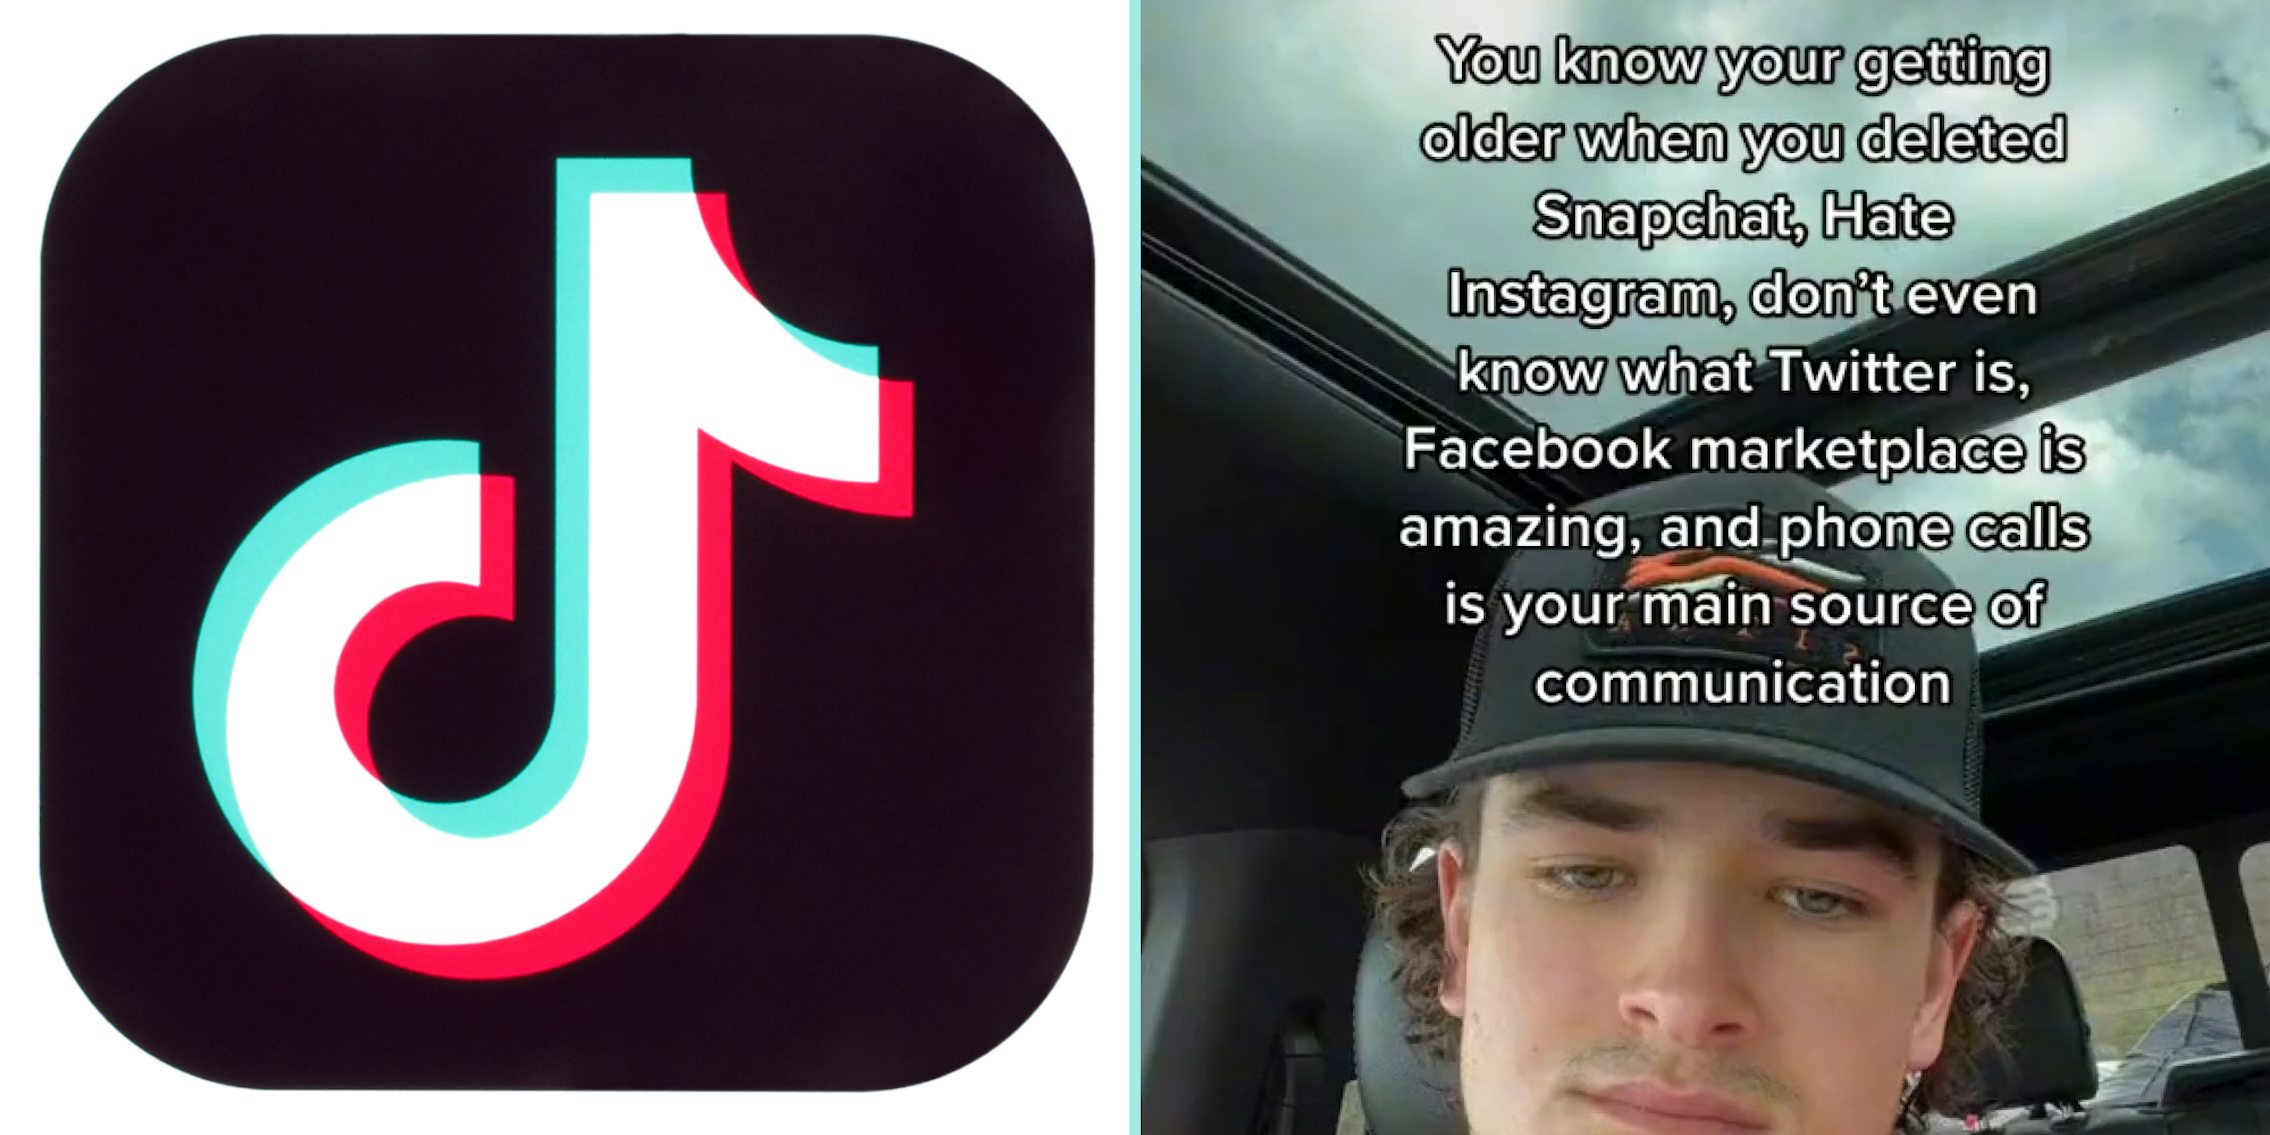 TikTok logo on white background (l) Man in hat in car tiktok caption 'You know you are getting older when you deleted snapchat, hate instagram, don't even know what twitter is, facebook marketplace is amazing, and phone calls is your main source of communication' (r)